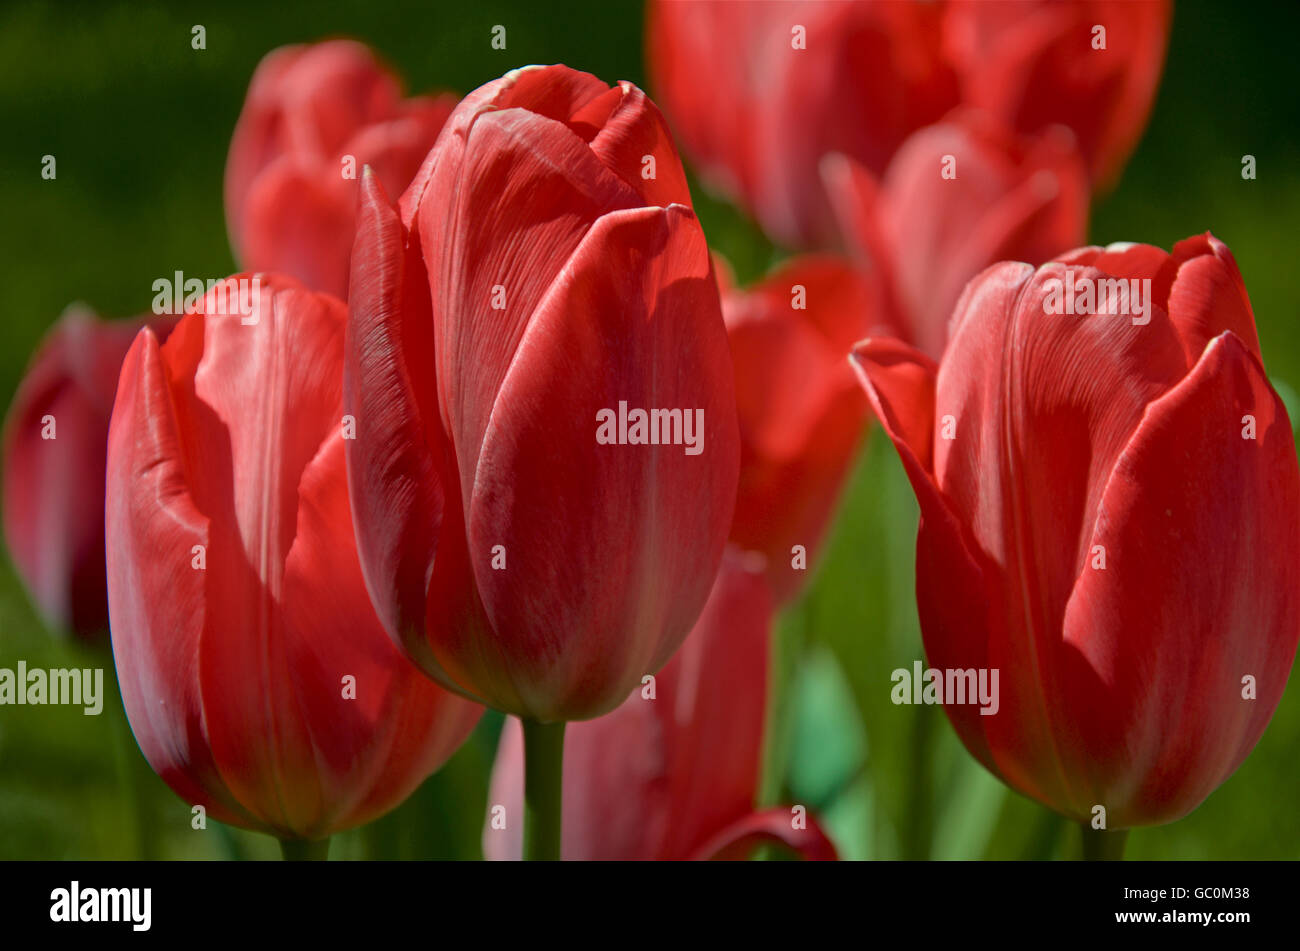 Red Impression tulips in flower Stock Photo